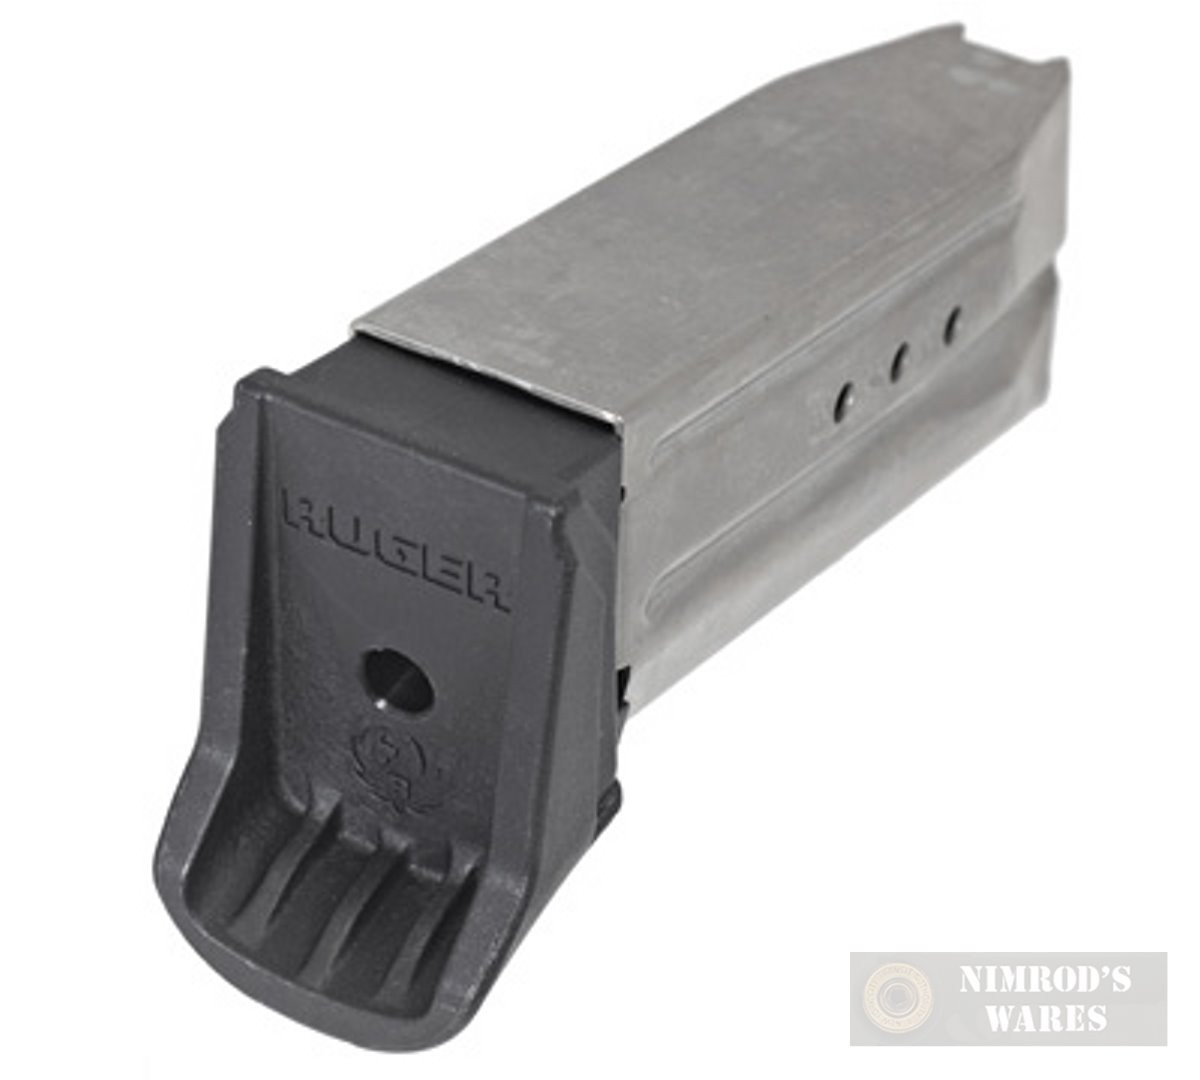 Ruger American Compact Pistol 9mm 10-Round Magazine  90617 Factory